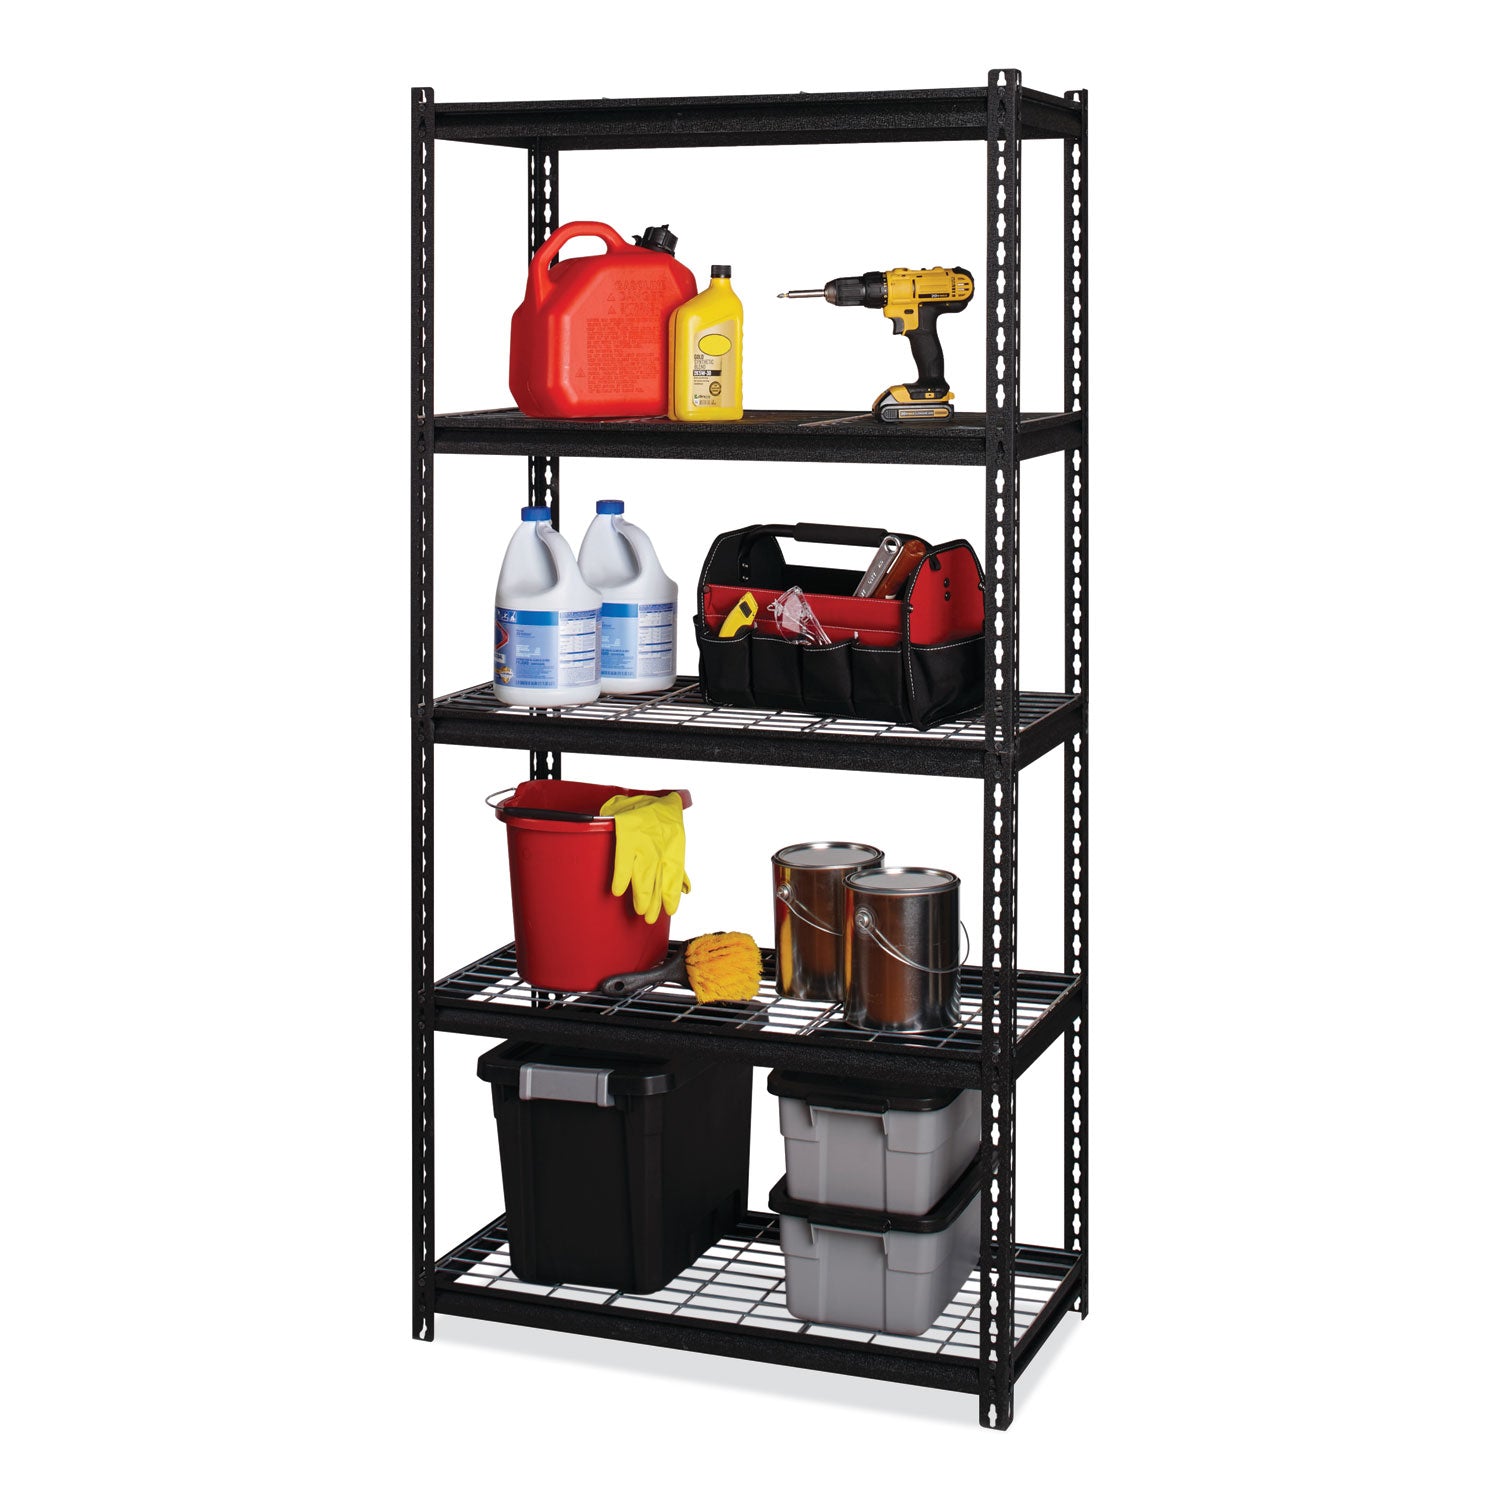 iron-horse-2300-wire-deck-shelving-five-shelf-36w-x-18d-x-72h-black-ships-in-4-6-business-days_hid22130 - 4